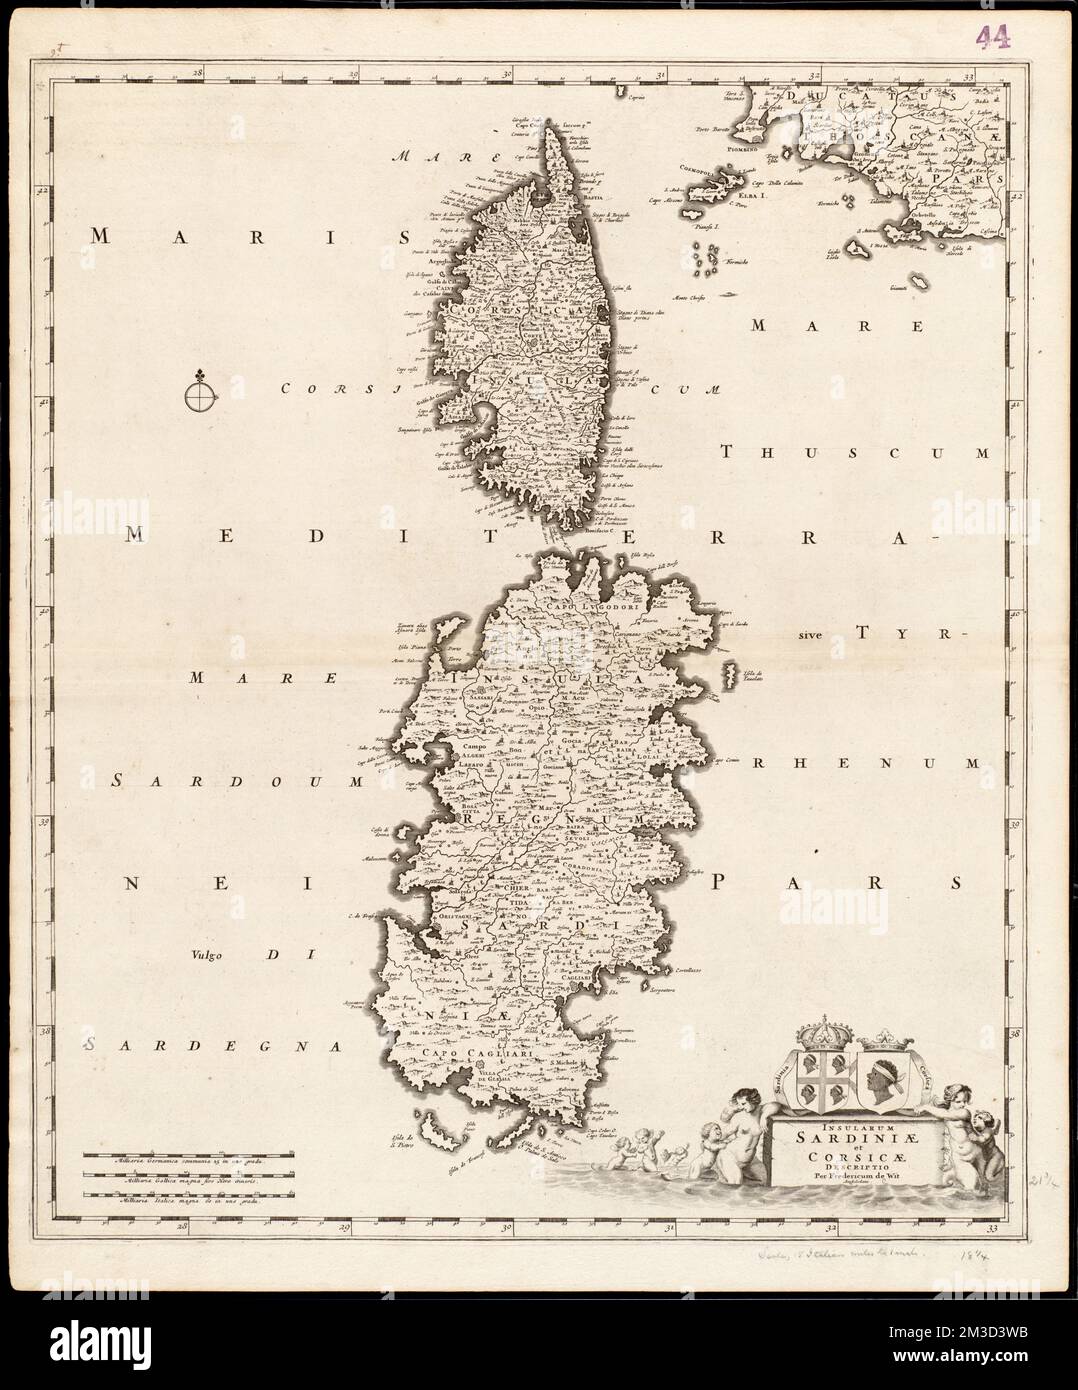 Insularum Sardiniae et Corsicae , Sardinia Italy, Maps, Early works to 1800, Corsica France, Maps, Early works to 1800 Norman B. Leventhal Map Center Collection Stock Photo